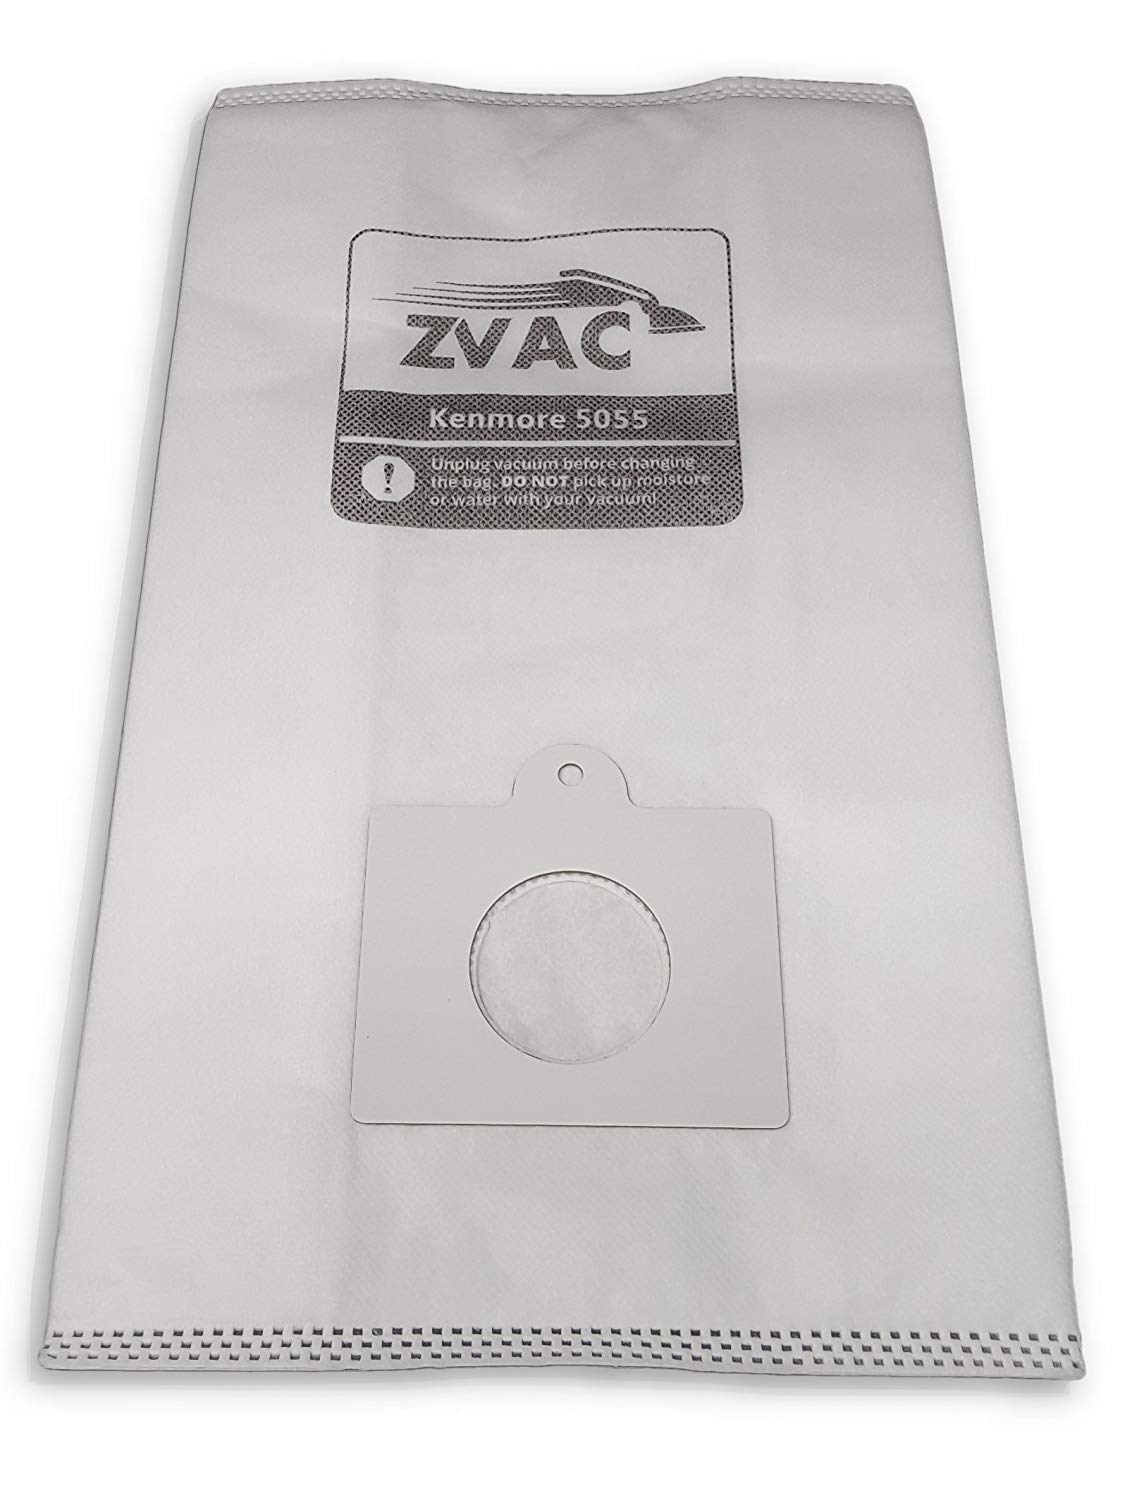 ZVac 18 Pack Compatible Vacuum Bags Replacement Kenmore C/Q Canister Vacuum Bags. Replaces Part# KM48751-12. Fits 50403 20-50410 50410 29430 29435 29459 24975 24981 & 24991